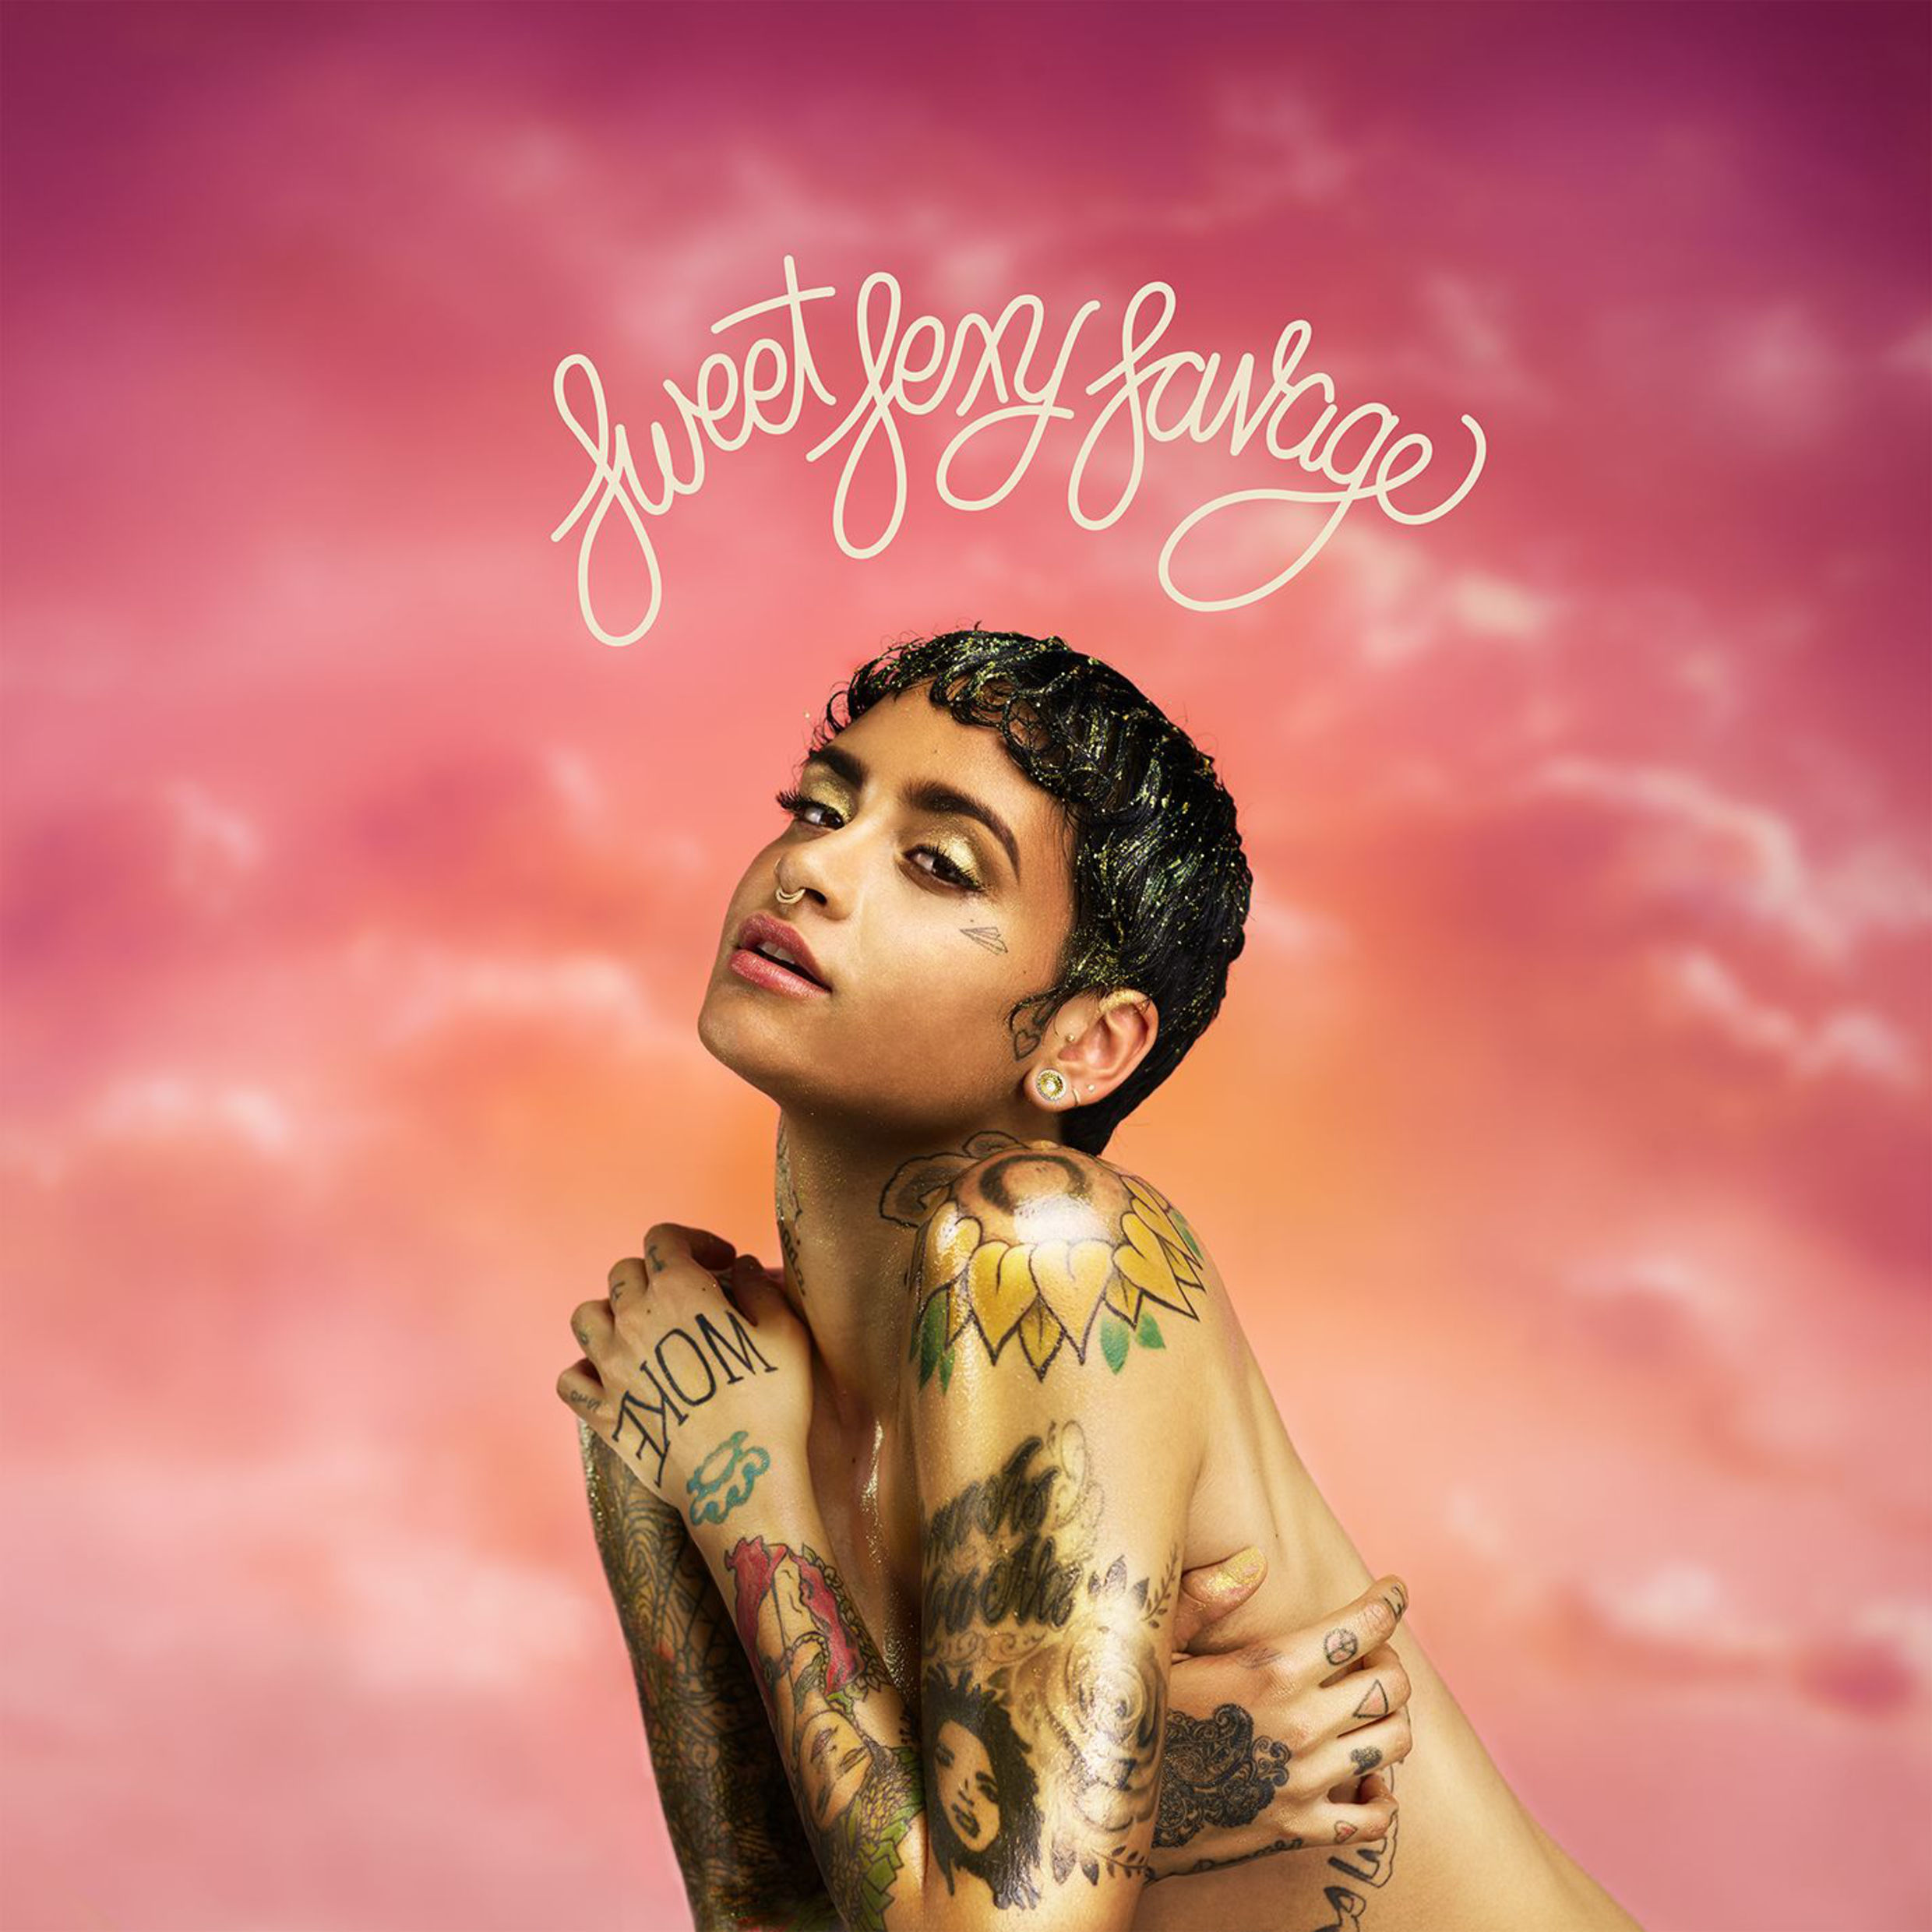 SweetSexySavage Album Review